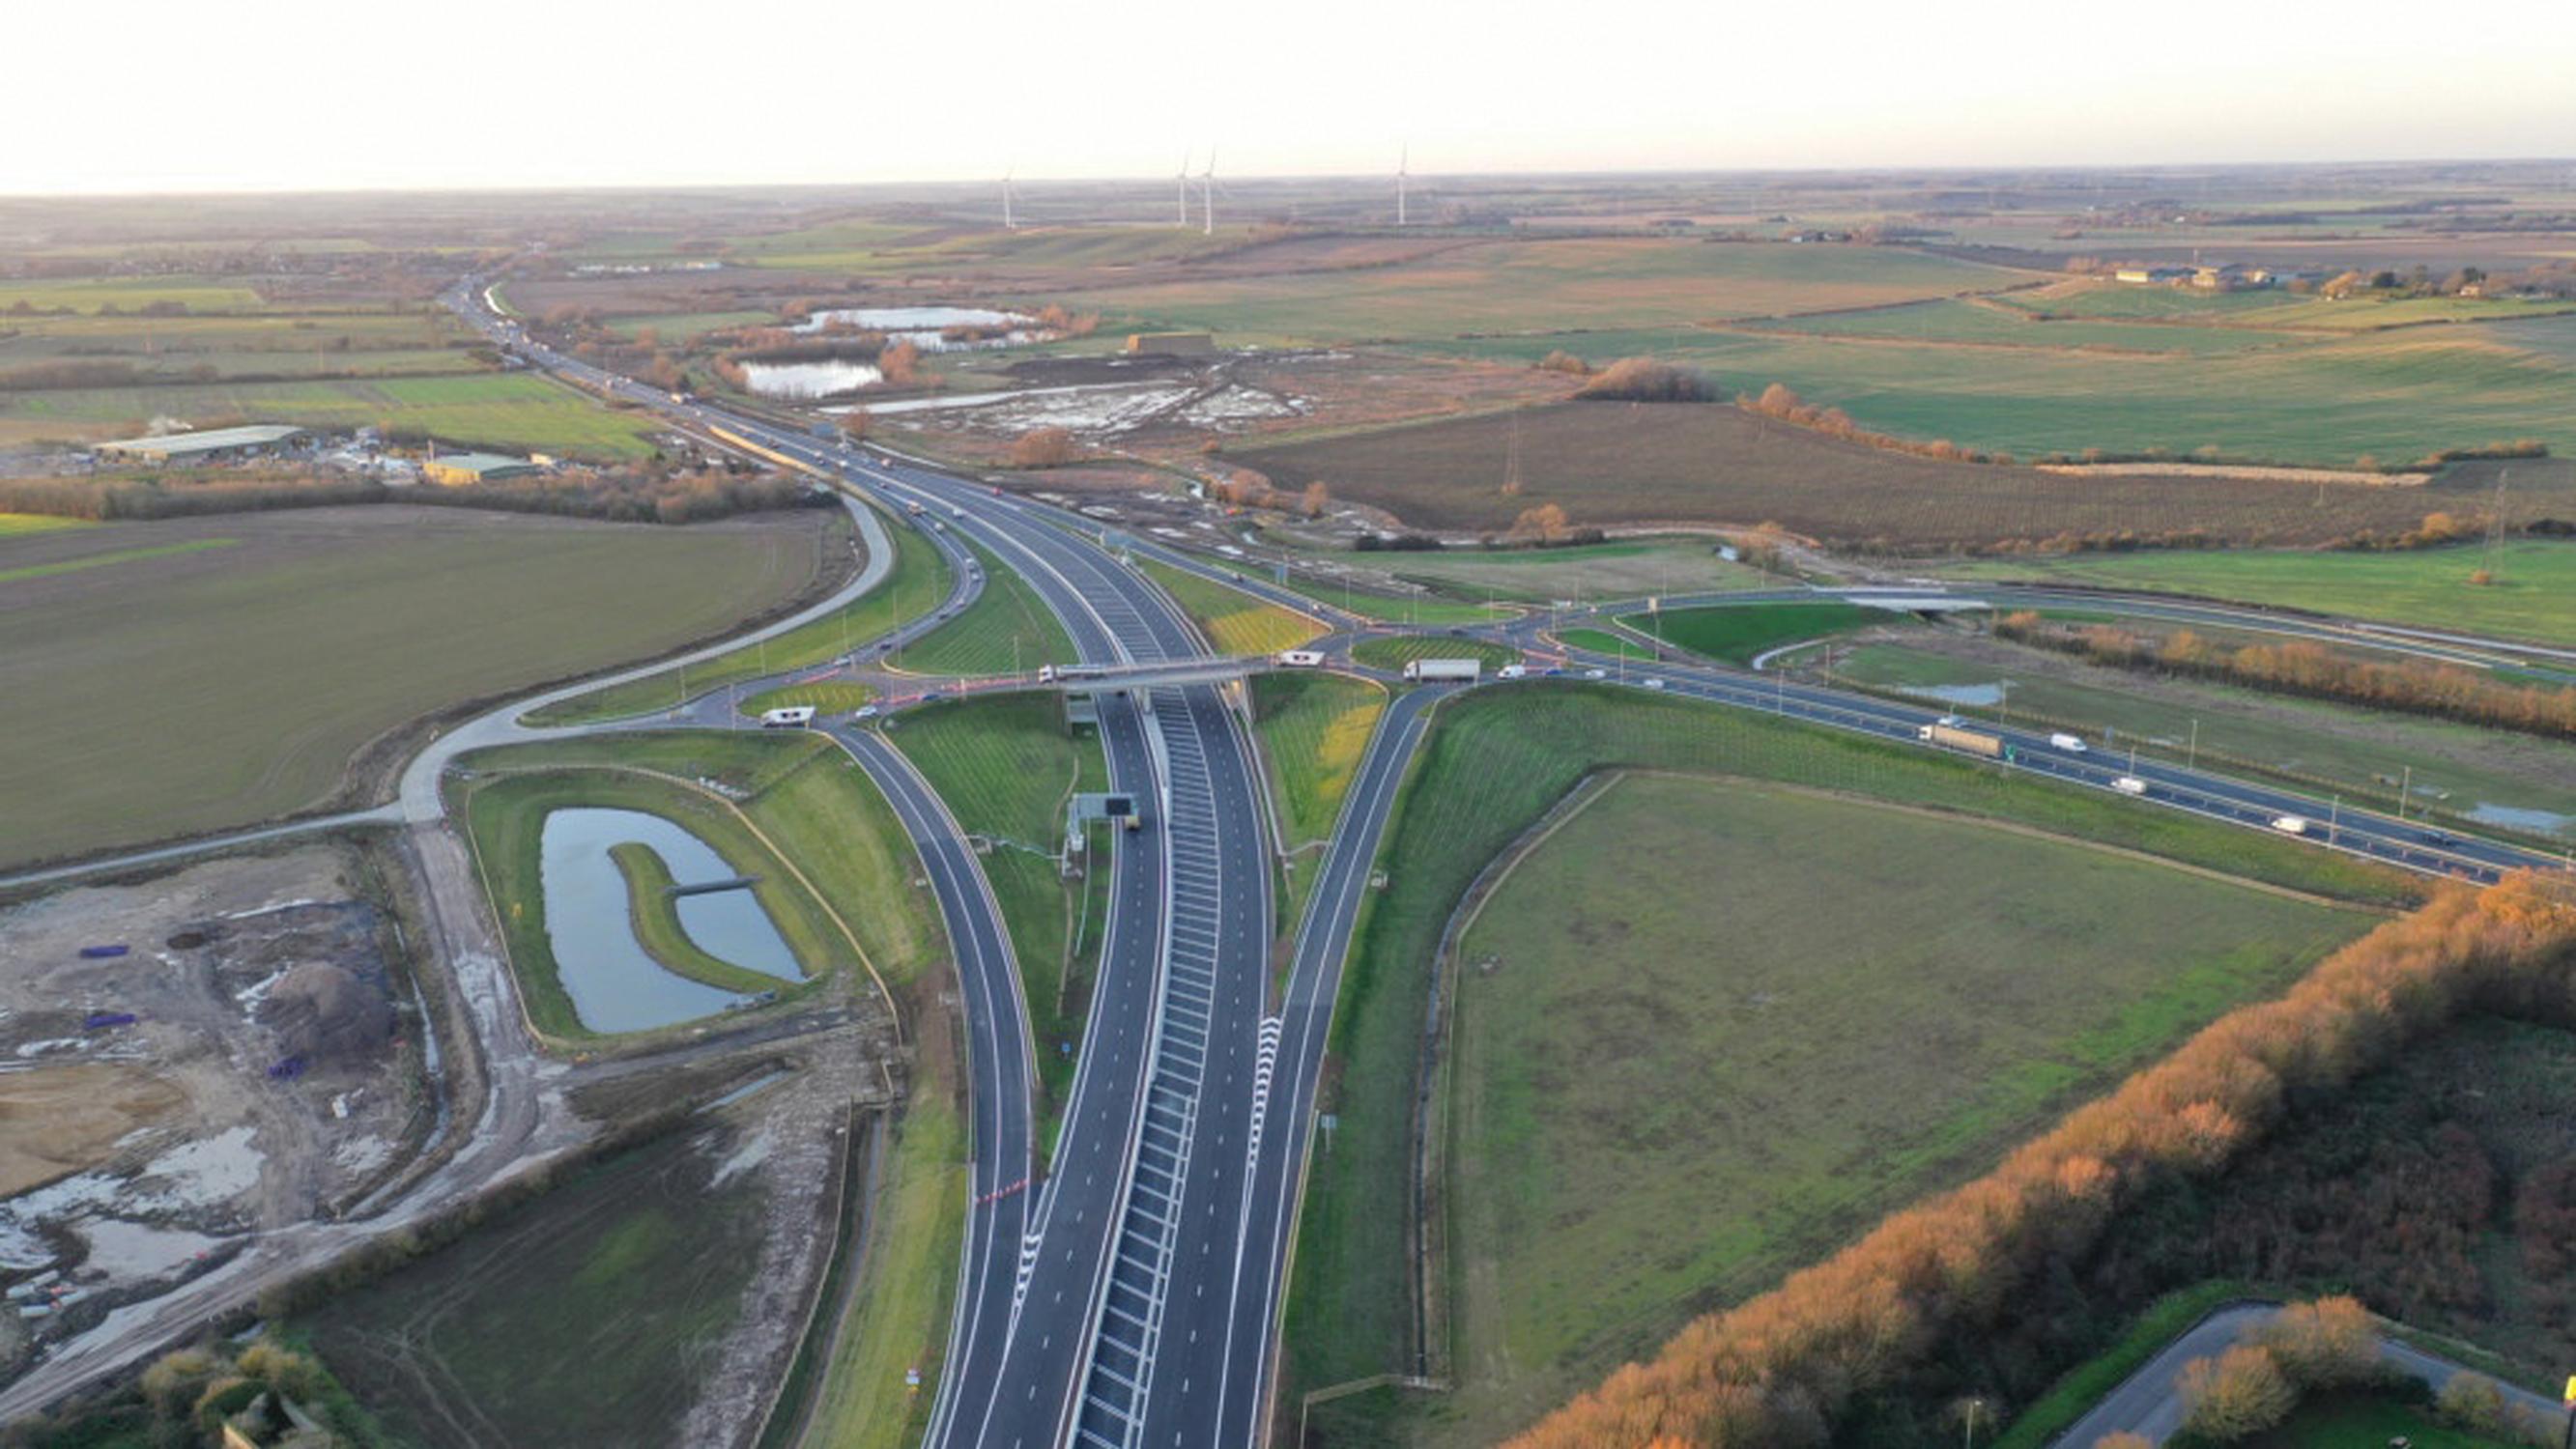 The new road is part of the larger A14 improvement between Cambridge and Huntingdon